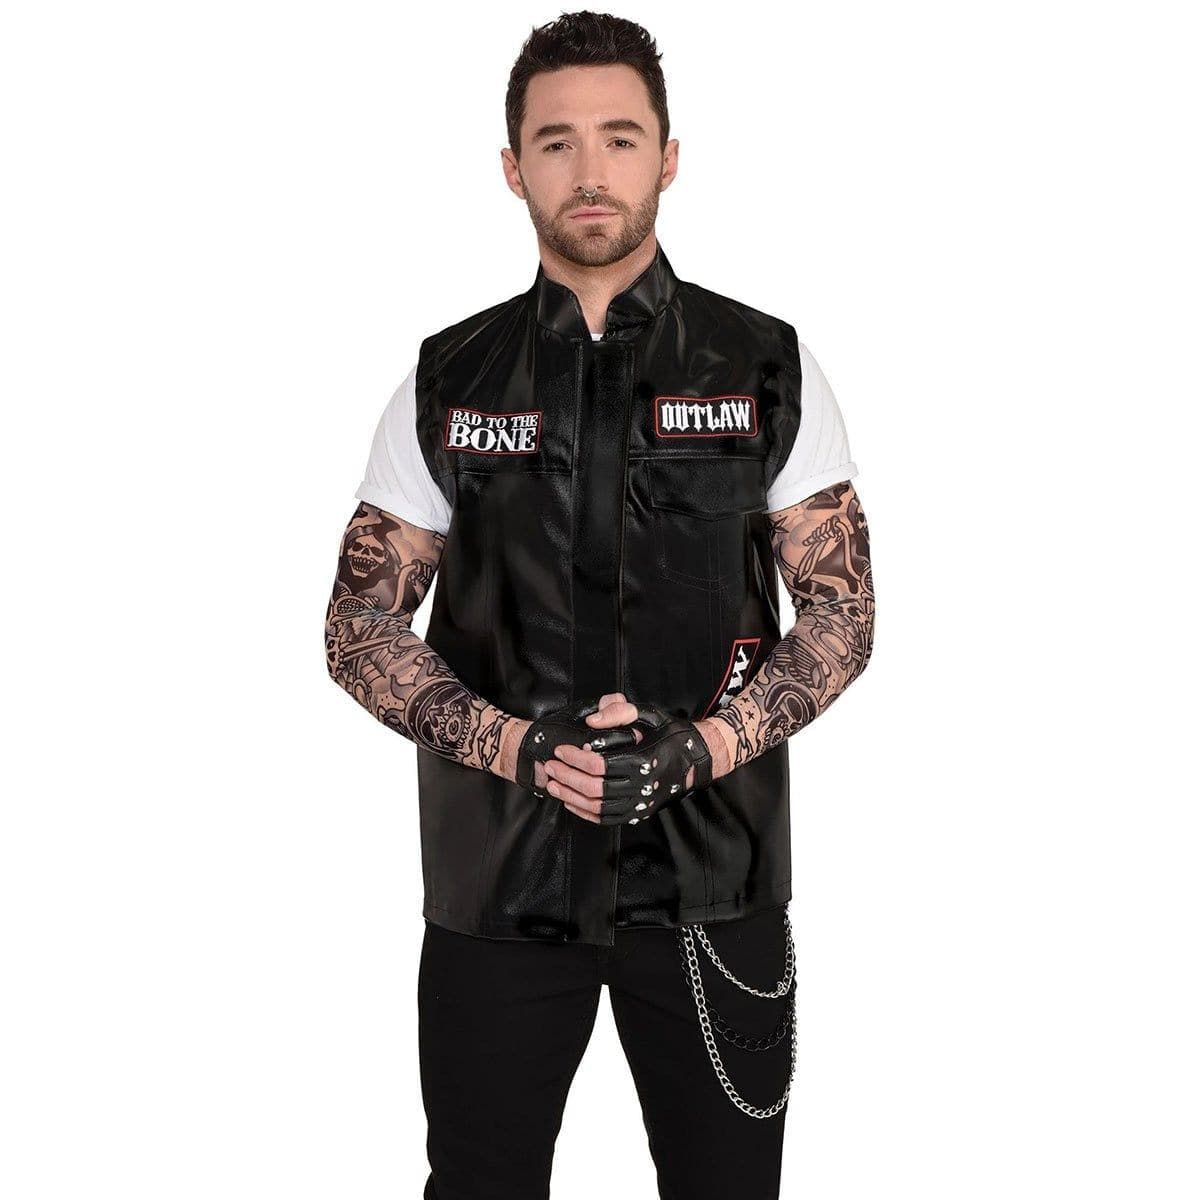 Buy Costume Accessories Tattoo Sleeves sold at Party Expert